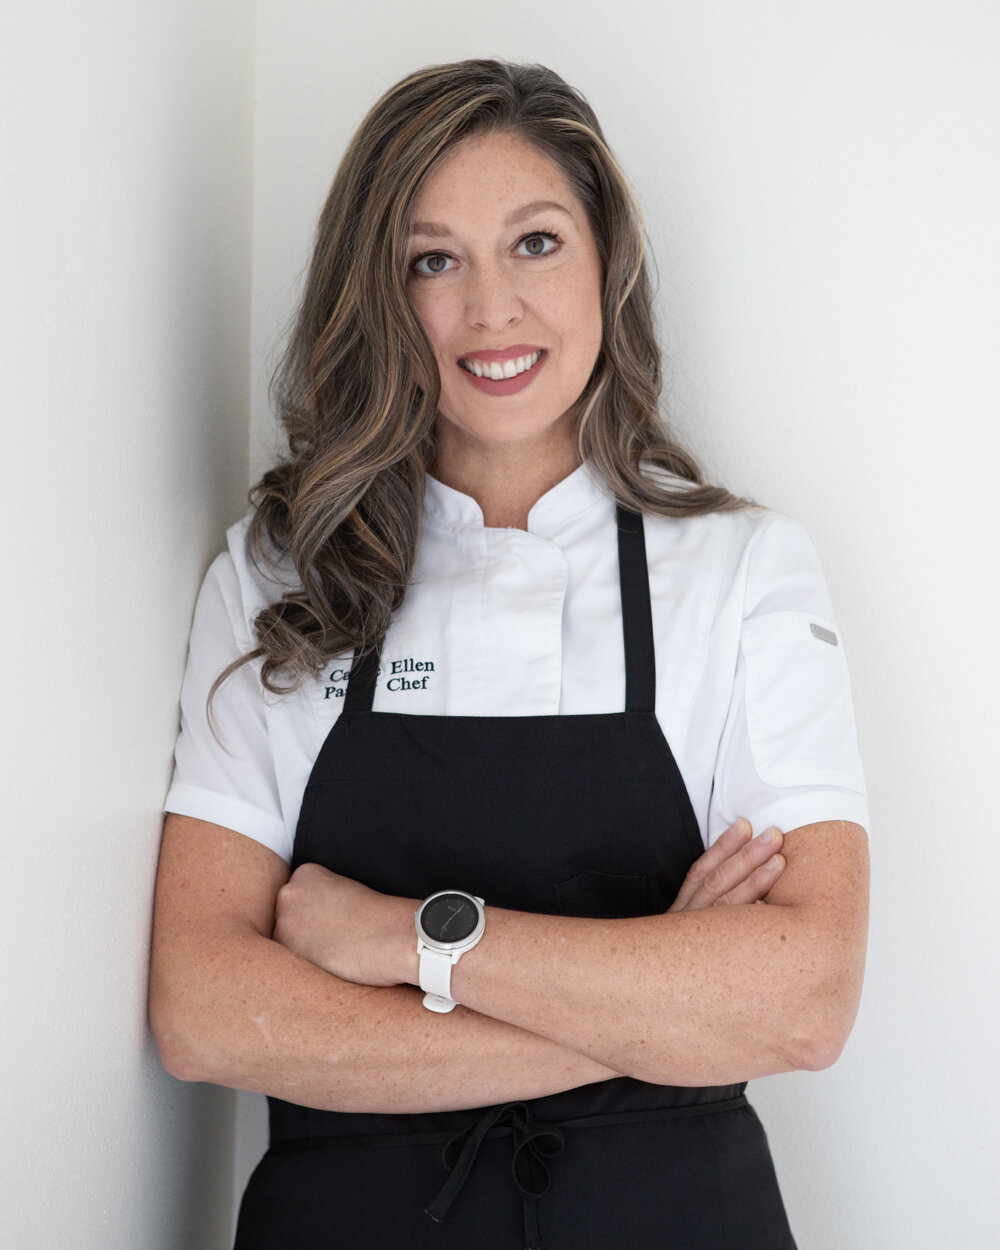 Transform your mindset, transform your life. The power of self-love and self-care can take you places you never imagined.⁣
Meet Pastry Chef @carrieellenpdx
HMUA: @hairmakeupready 

#dizonphotography #pdxpersonalbrandphotographer #beavertonphotographe